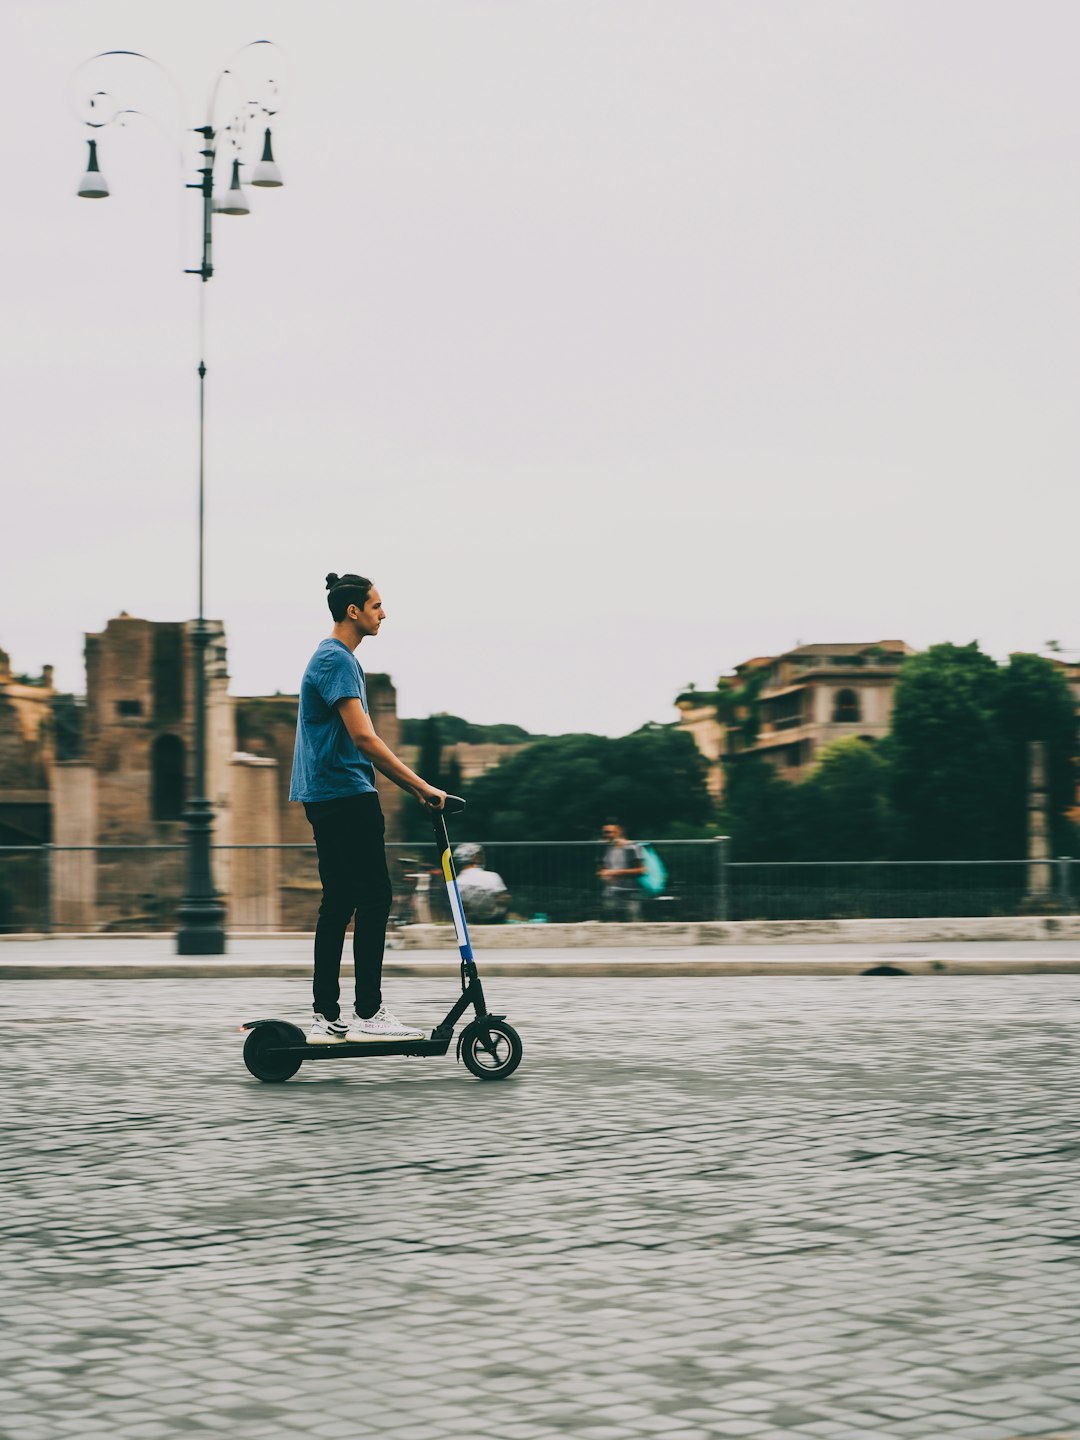 man in pink shirt and black pants riding kick scooter on water during daytime